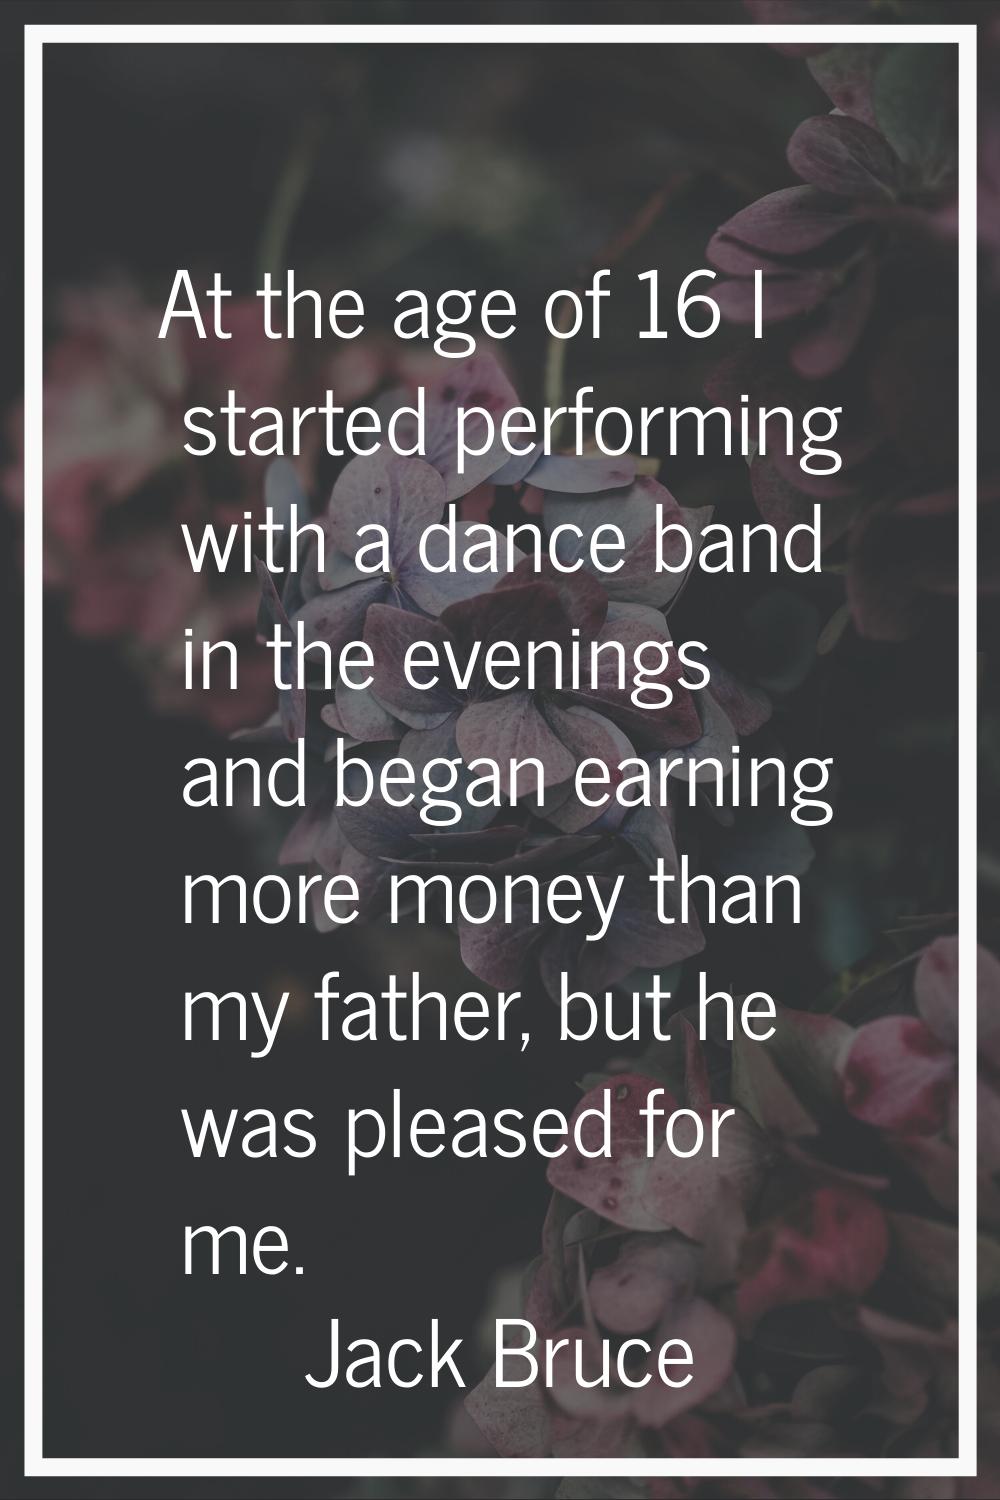 At the age of 16 I started performing with a dance band in the evenings and began earning more mone